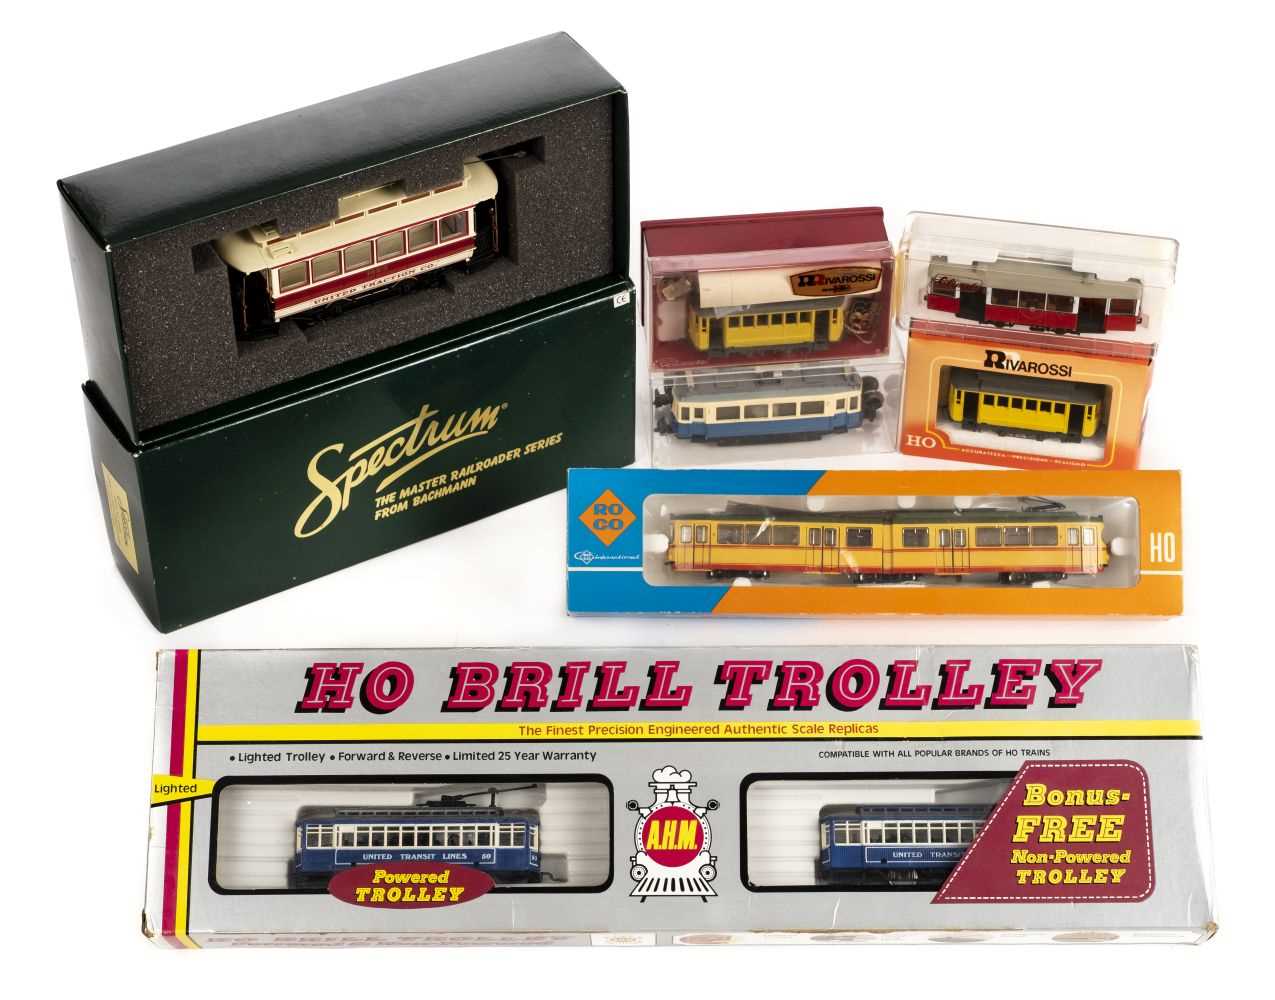 Lot 9 - Trams. A collection of powered tram car models